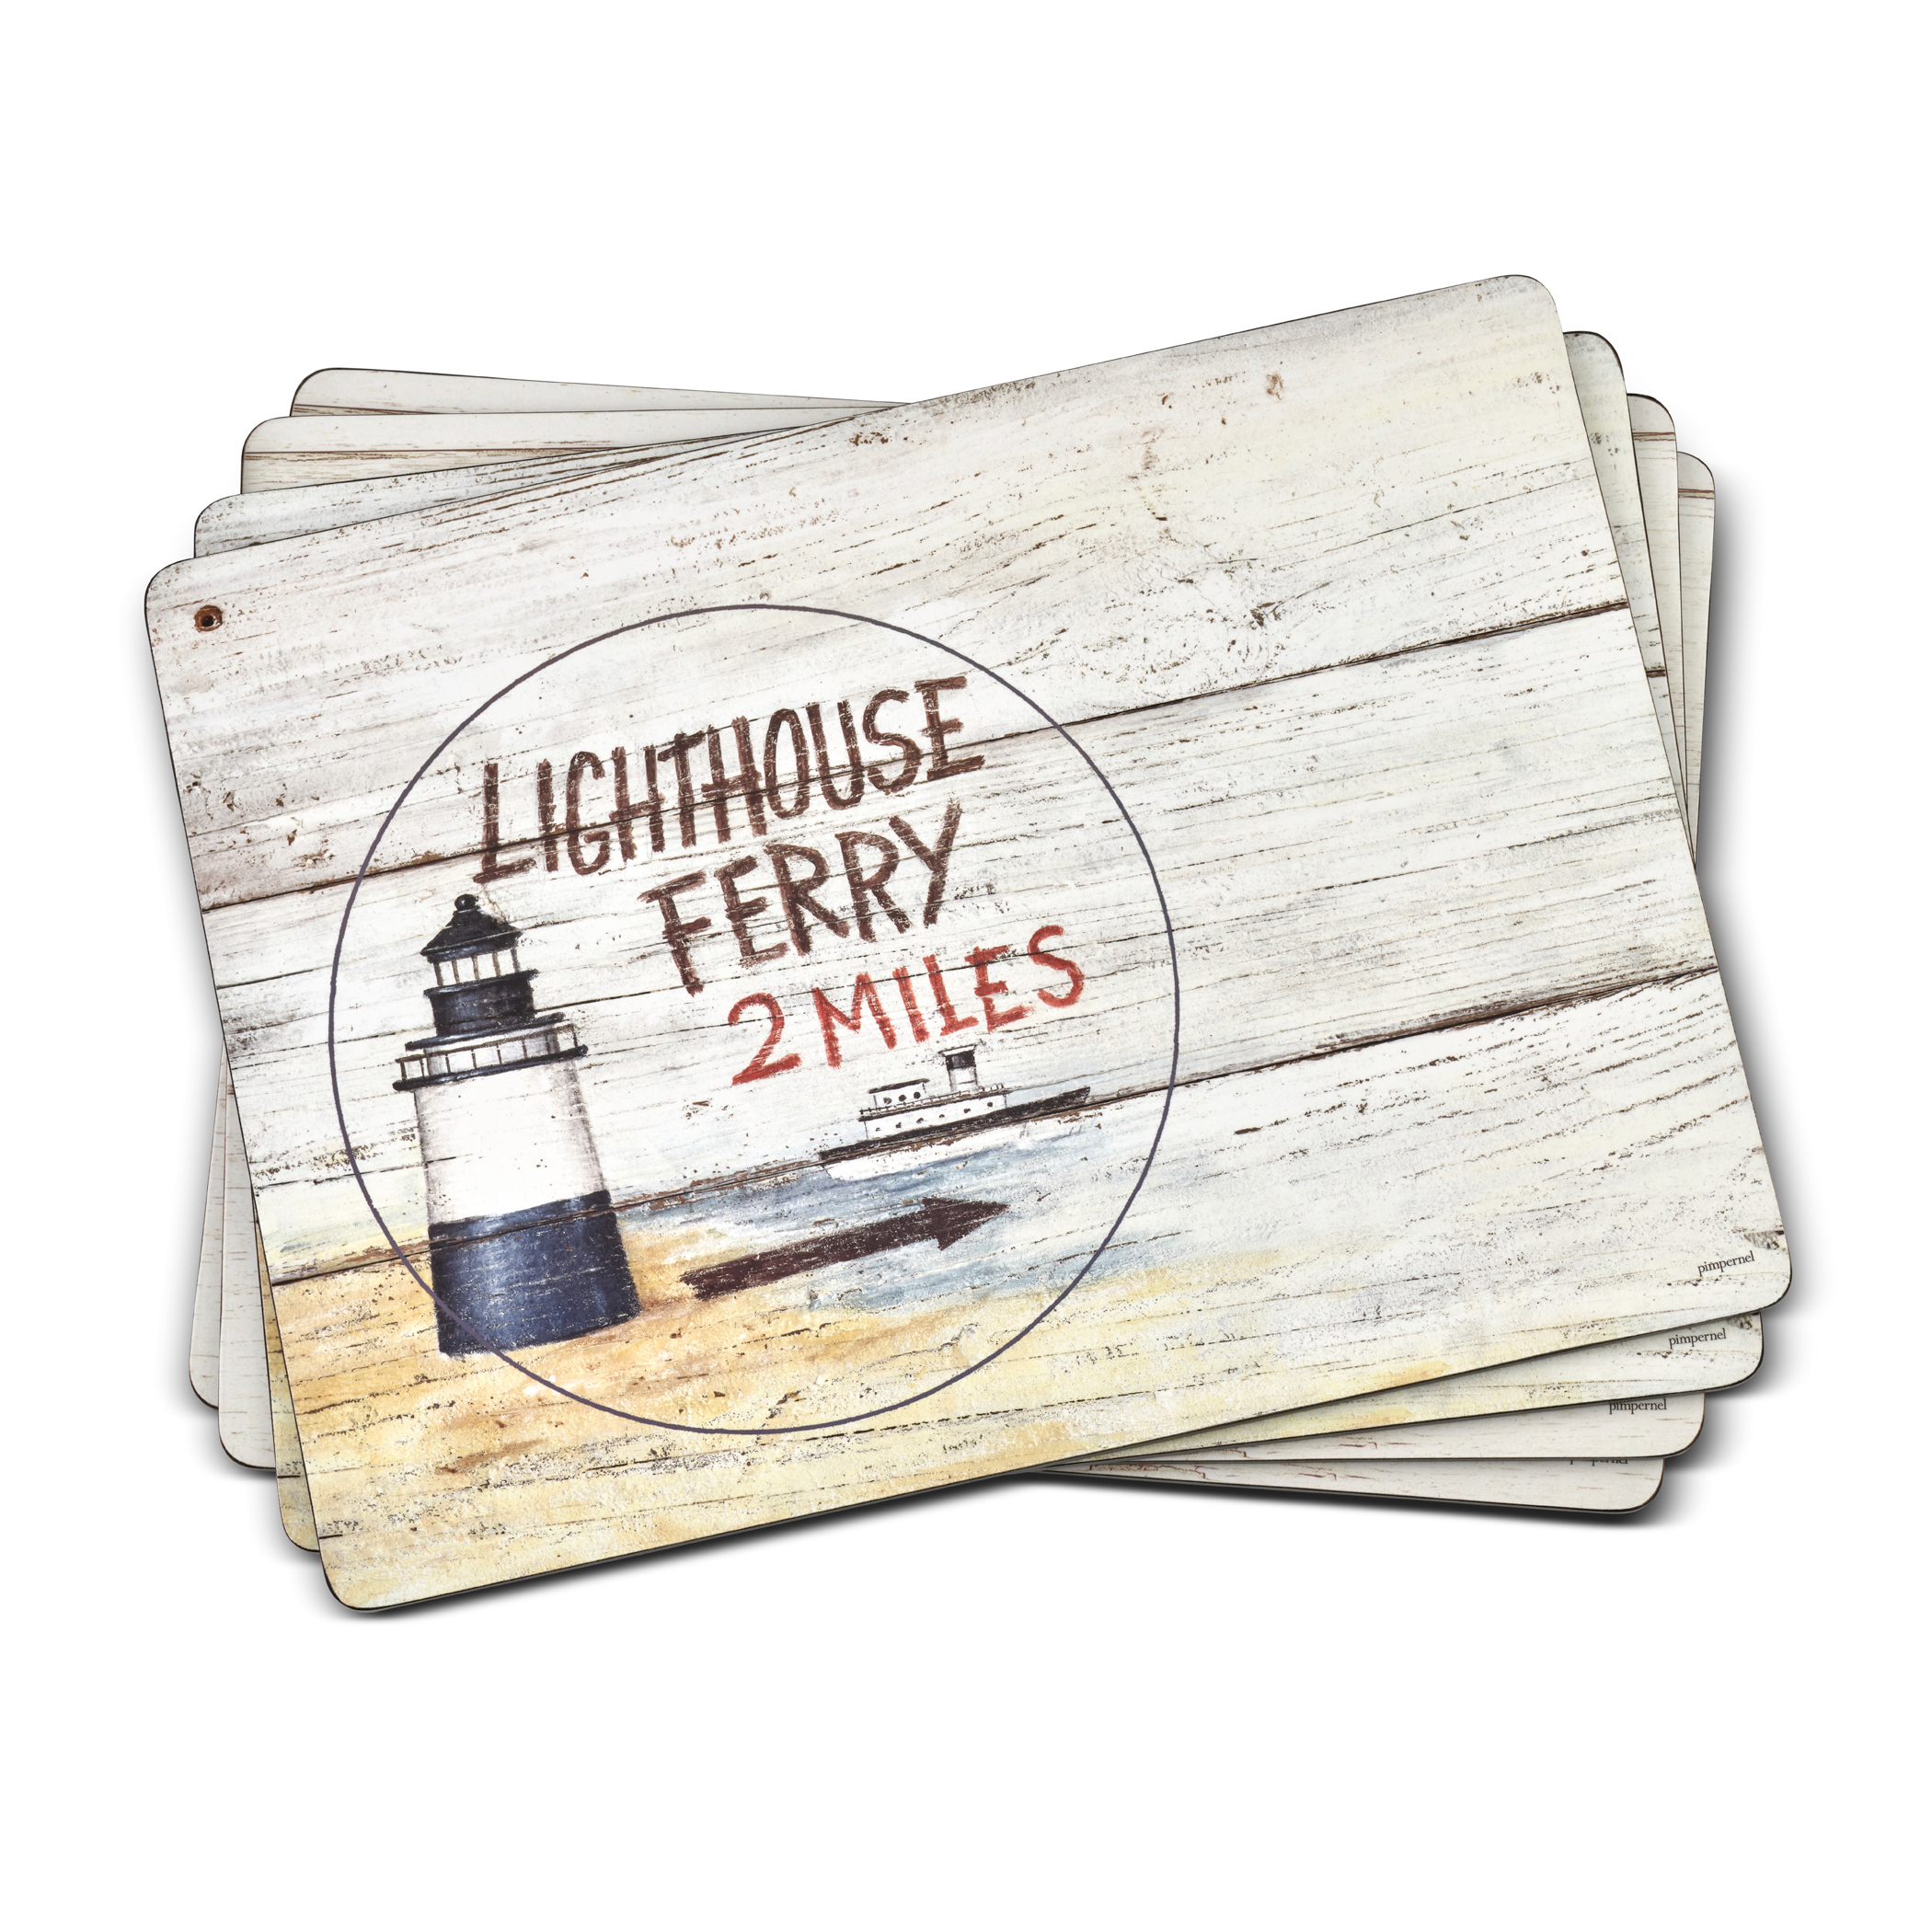 Coastal Signs Placemat Set of 4 image number null